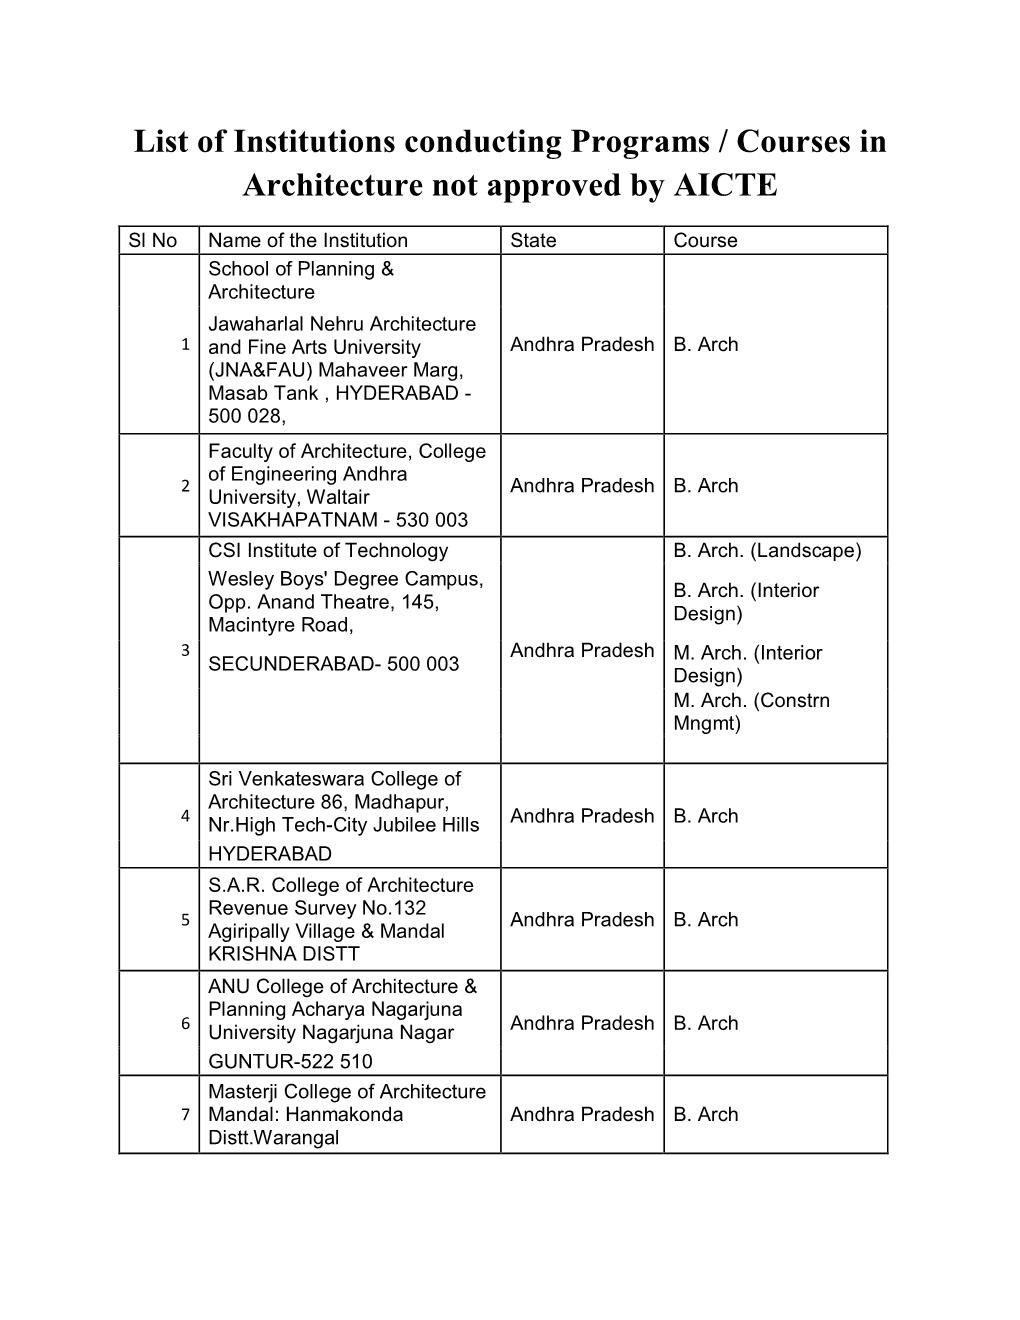 List of Institutions Conducting Programs / Courses in Architecture Not Approved by AICTE